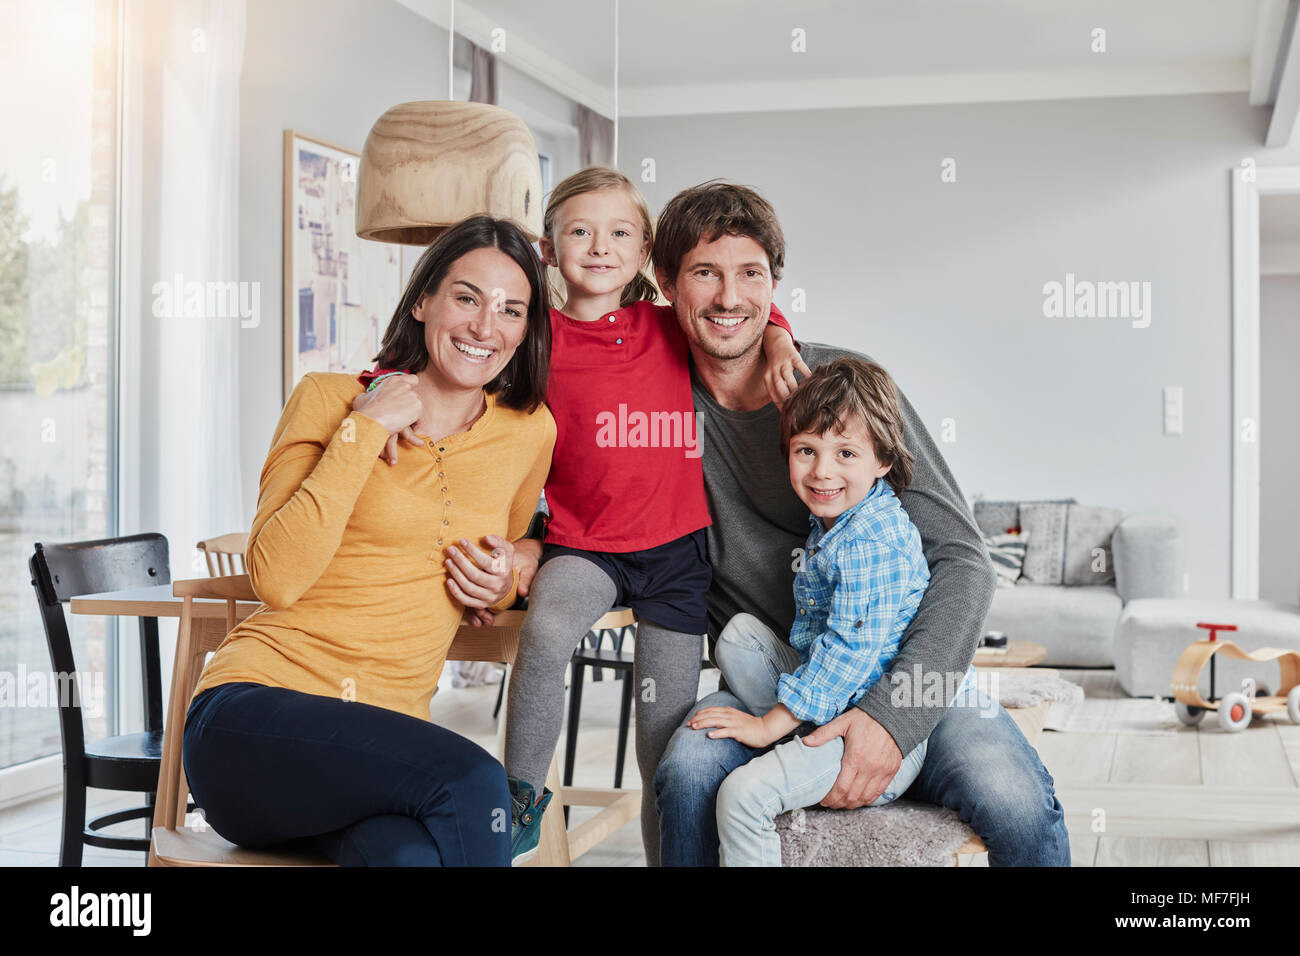 Portrait of happy family with two kids at home Stock Photo